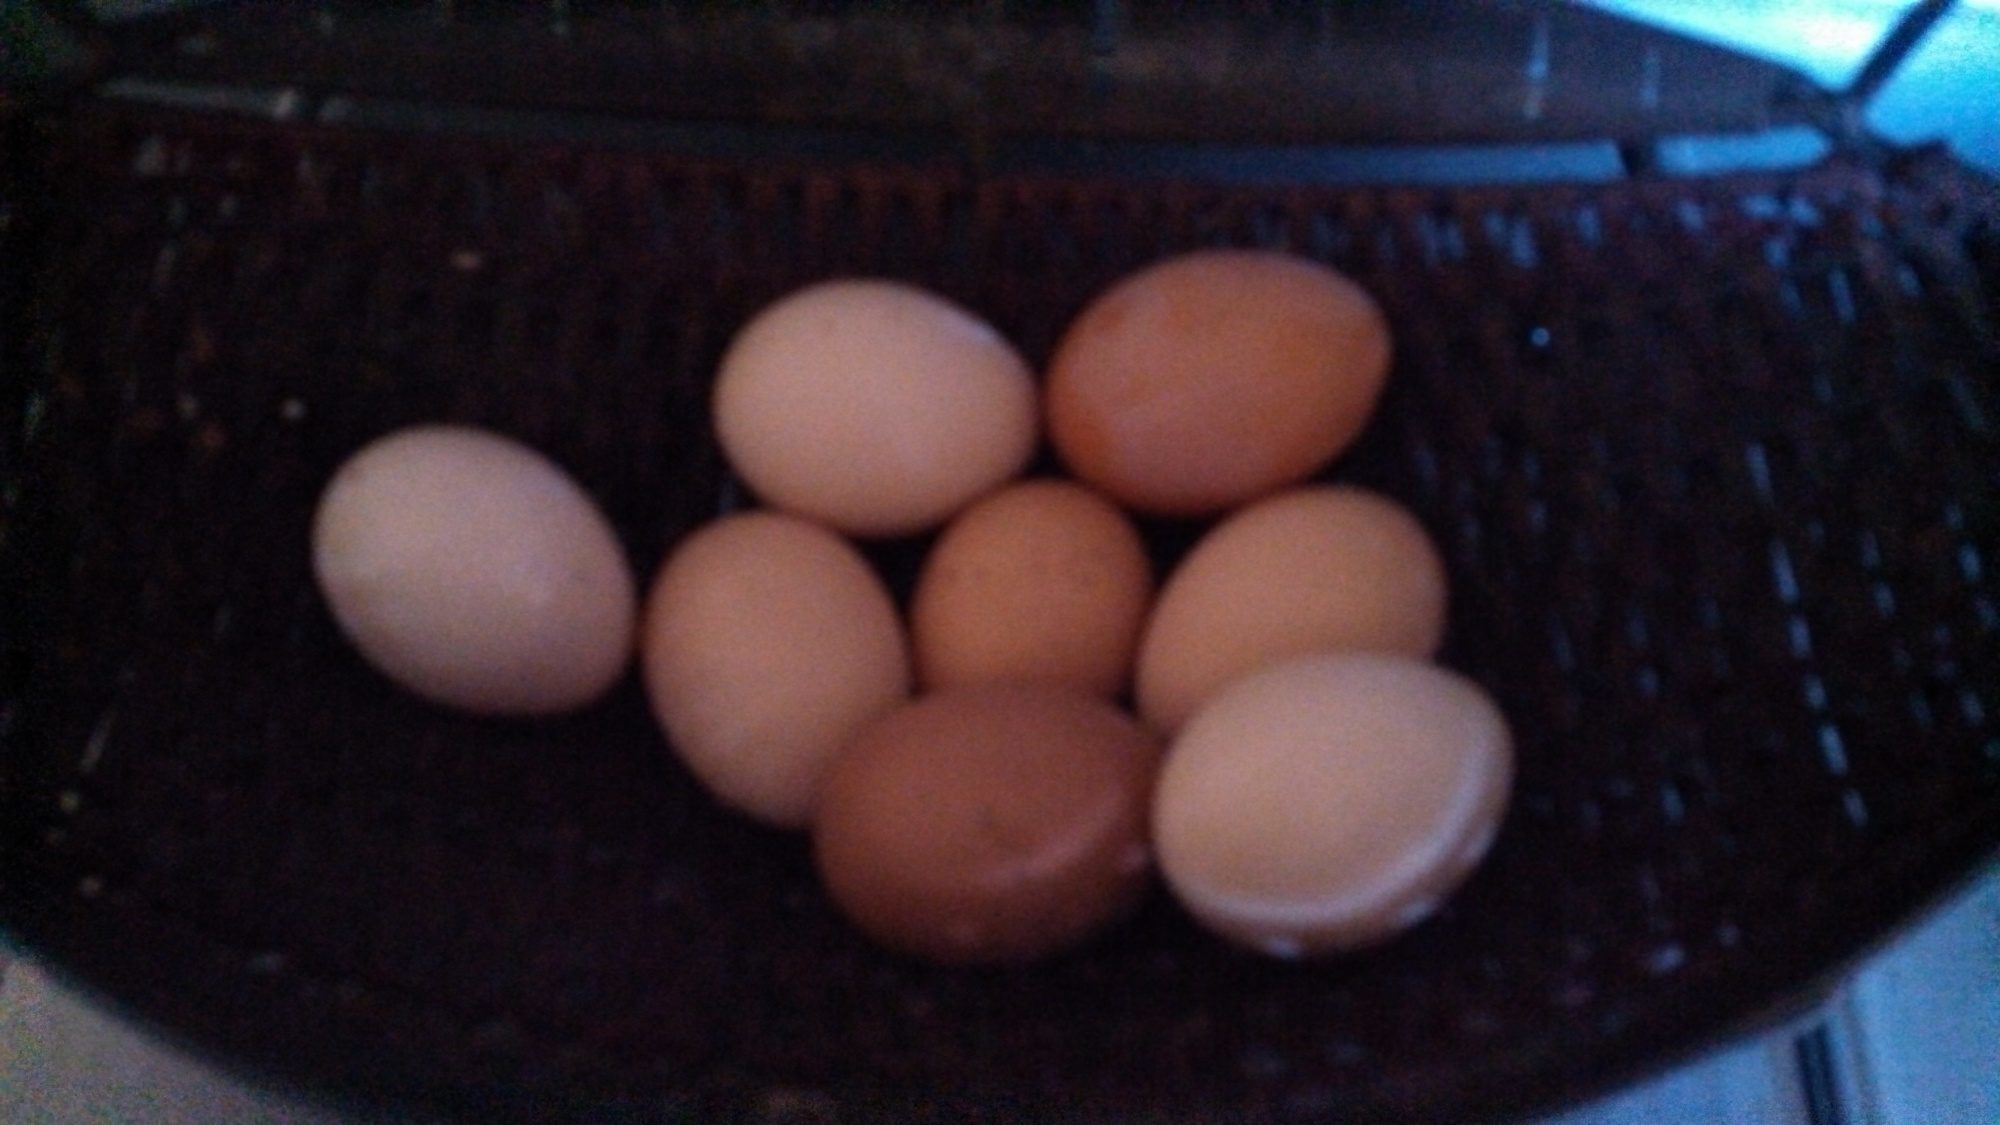 Eggs collected from my first flock of free chickens collected on Craigslist